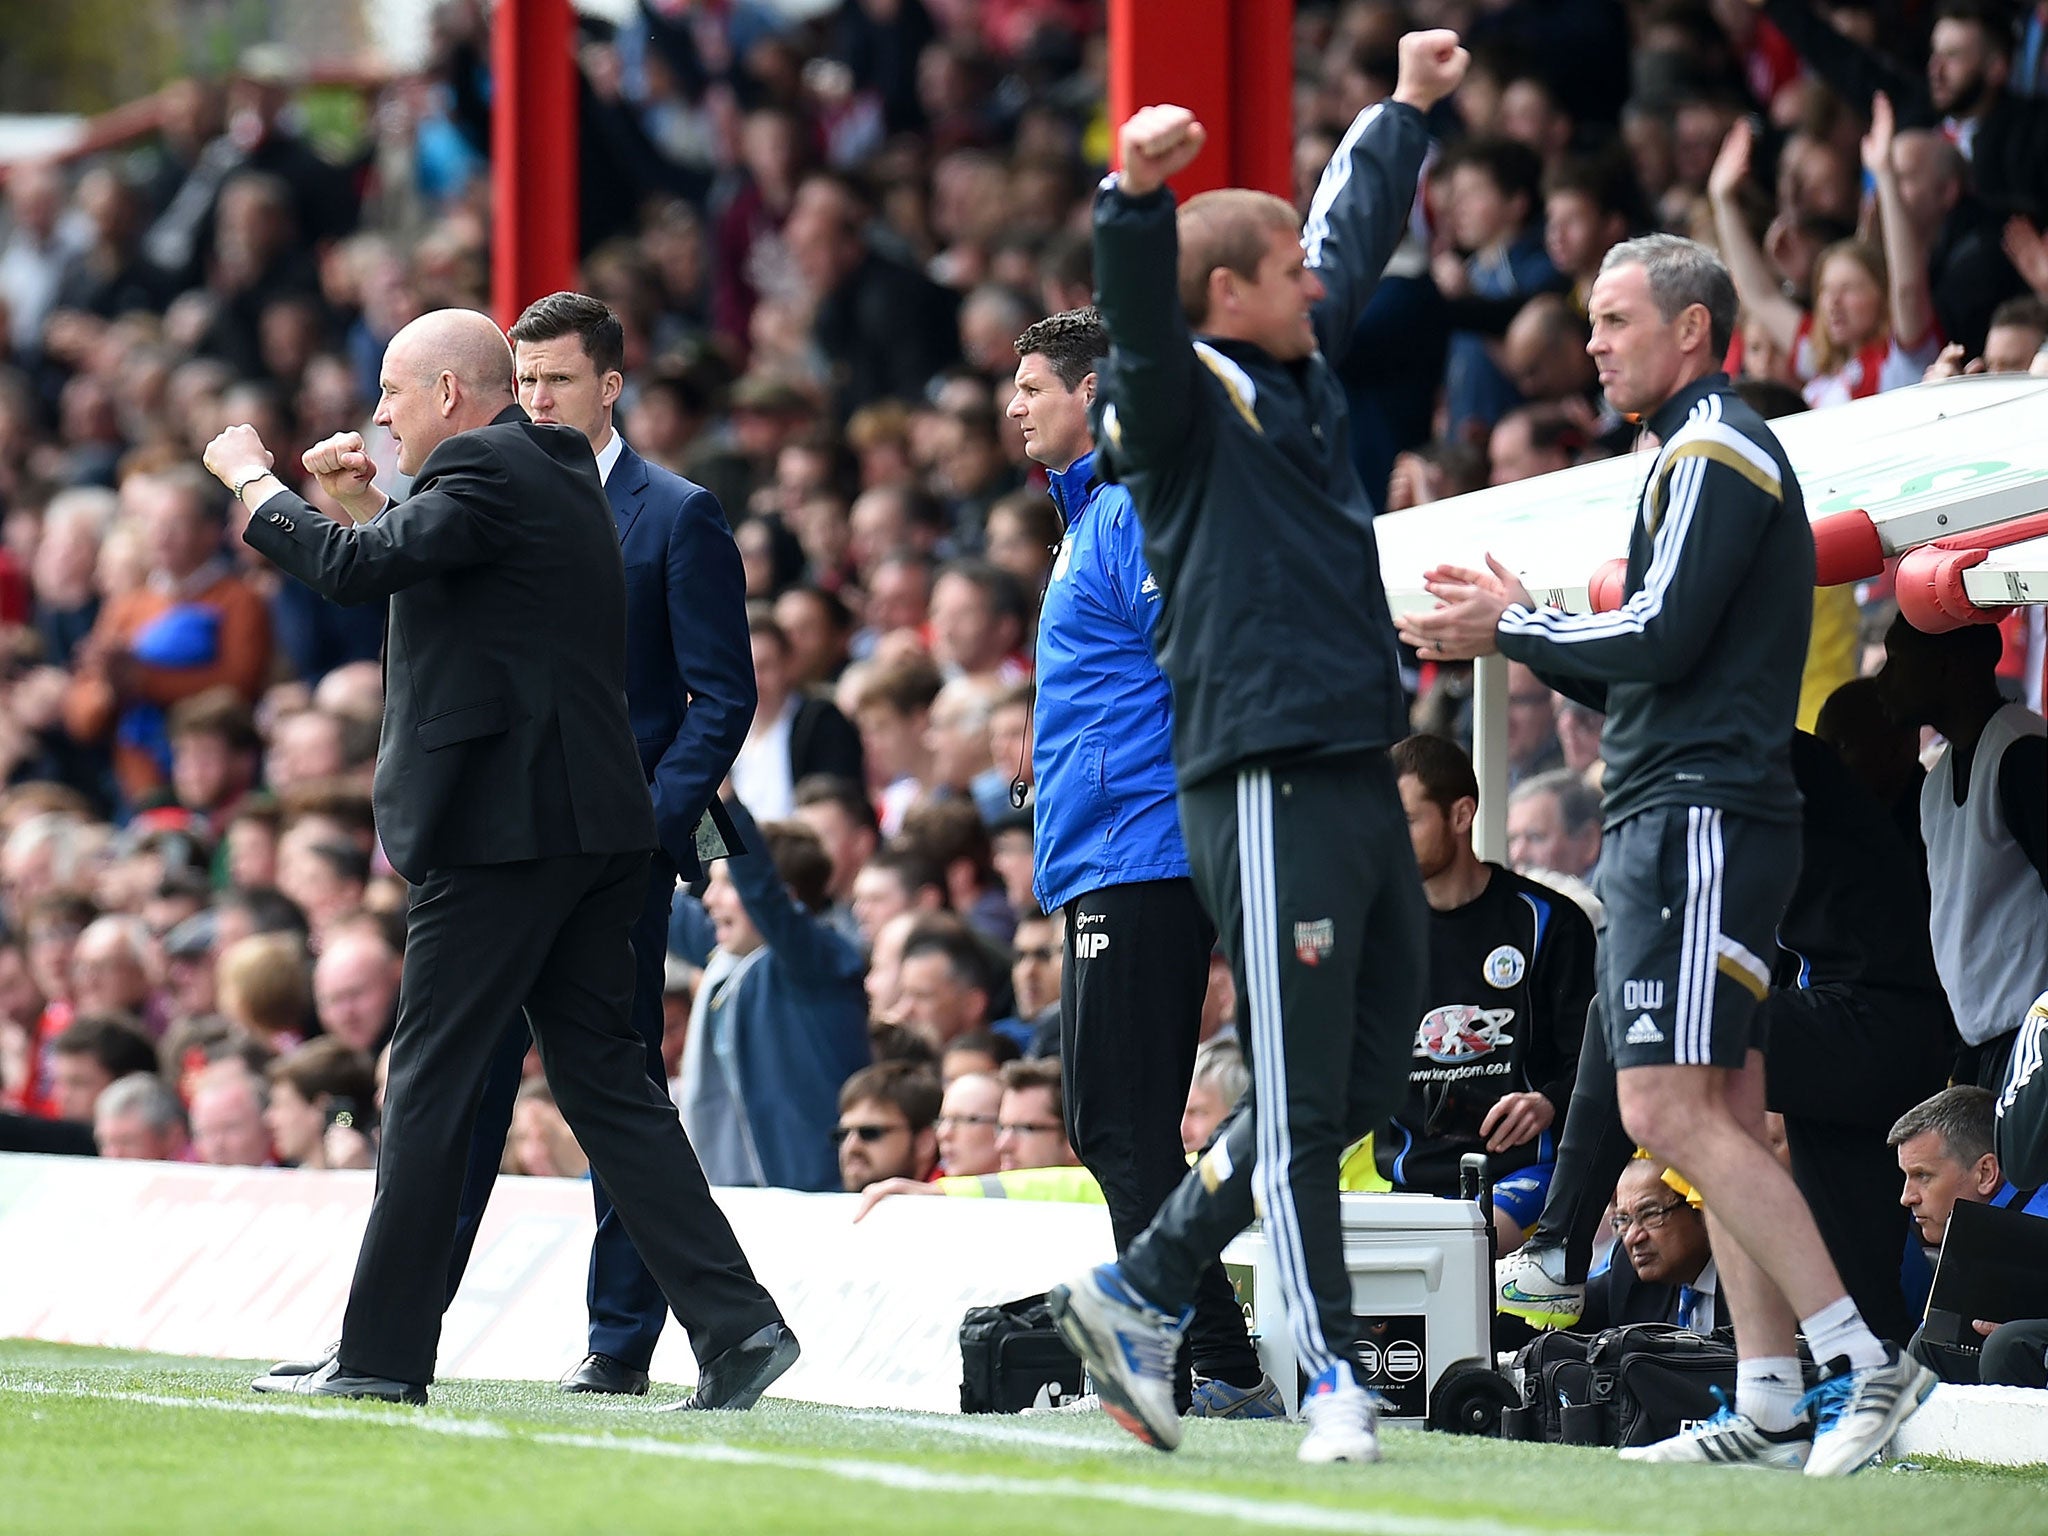 Mark Warburton leads the celebrations as Brentford reach the Championship play-offs